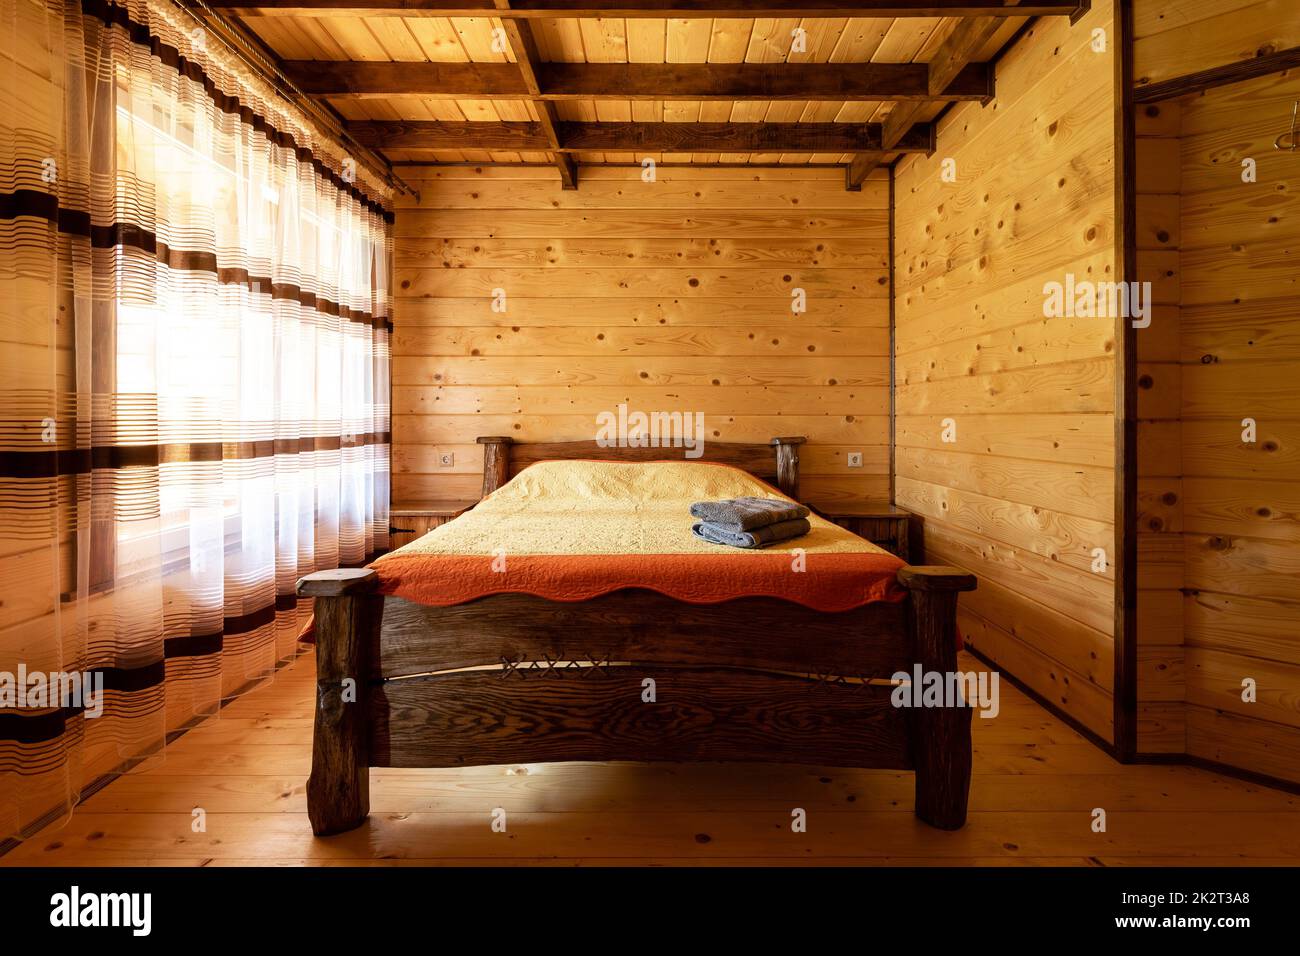 Rustic wooden bed in a cozy cottage room with a double bed, bedside table, blankets and towels. Stock Photo